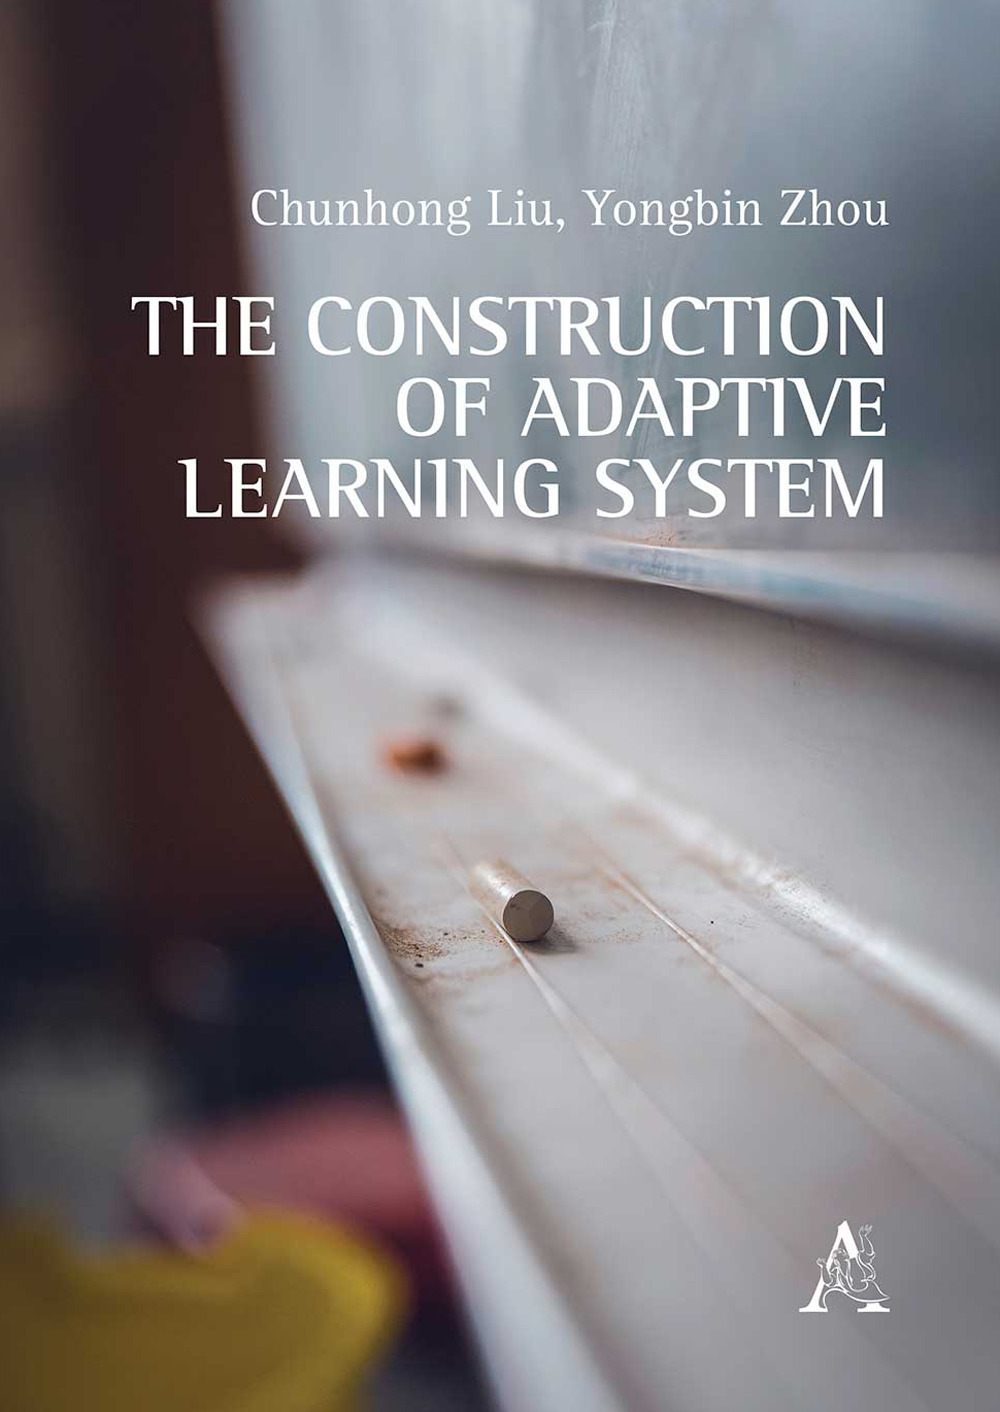 The Construction of Adaptive Learning System